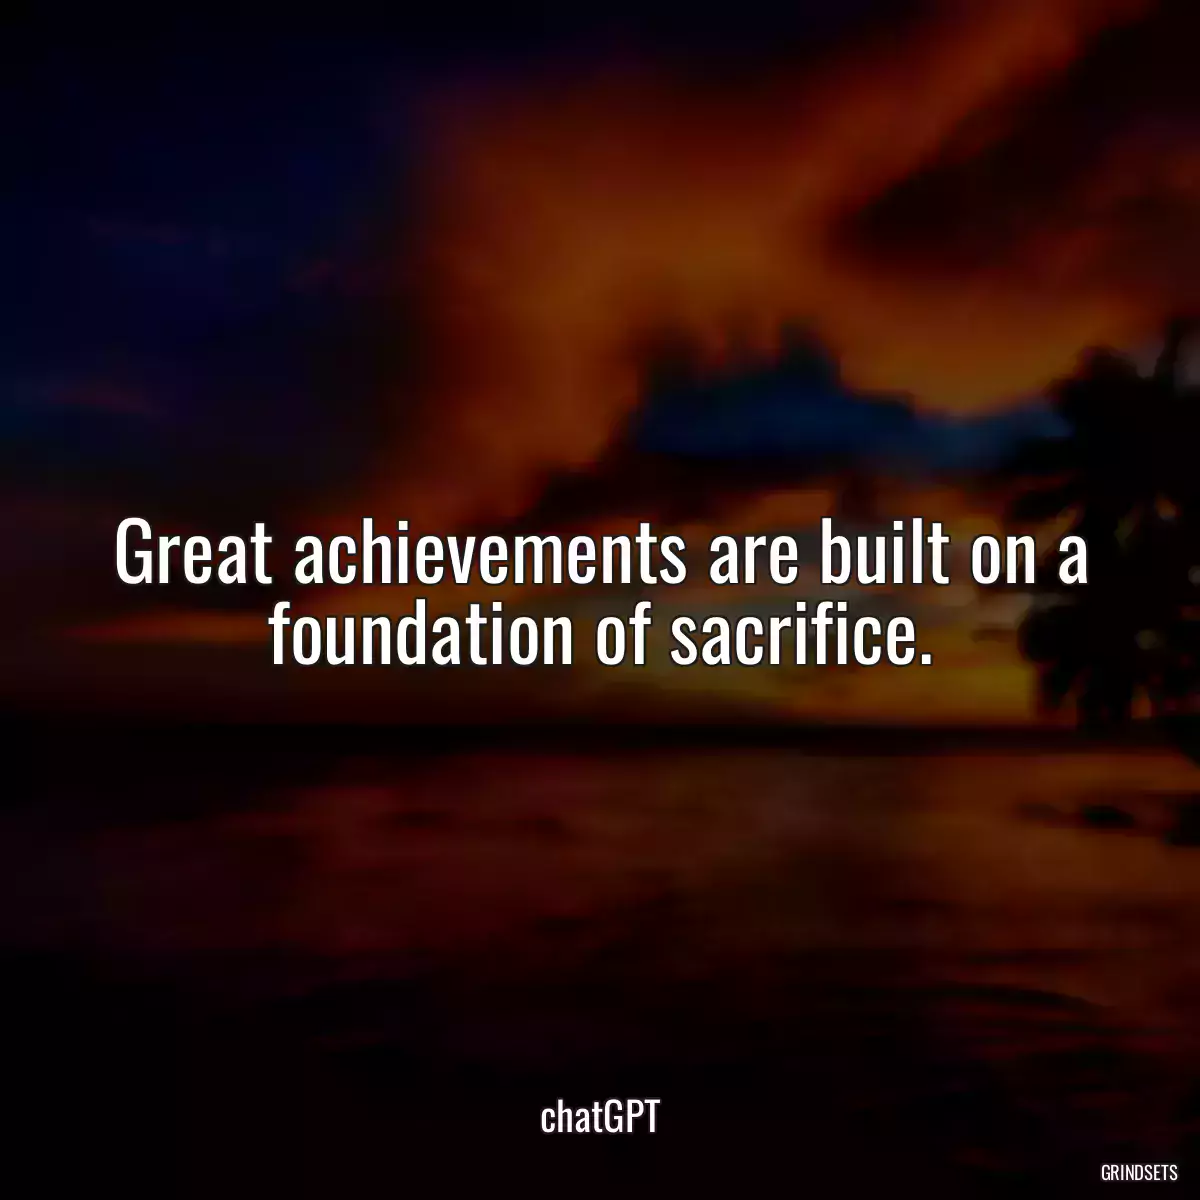 Great achievements are built on a foundation of sacrifice.